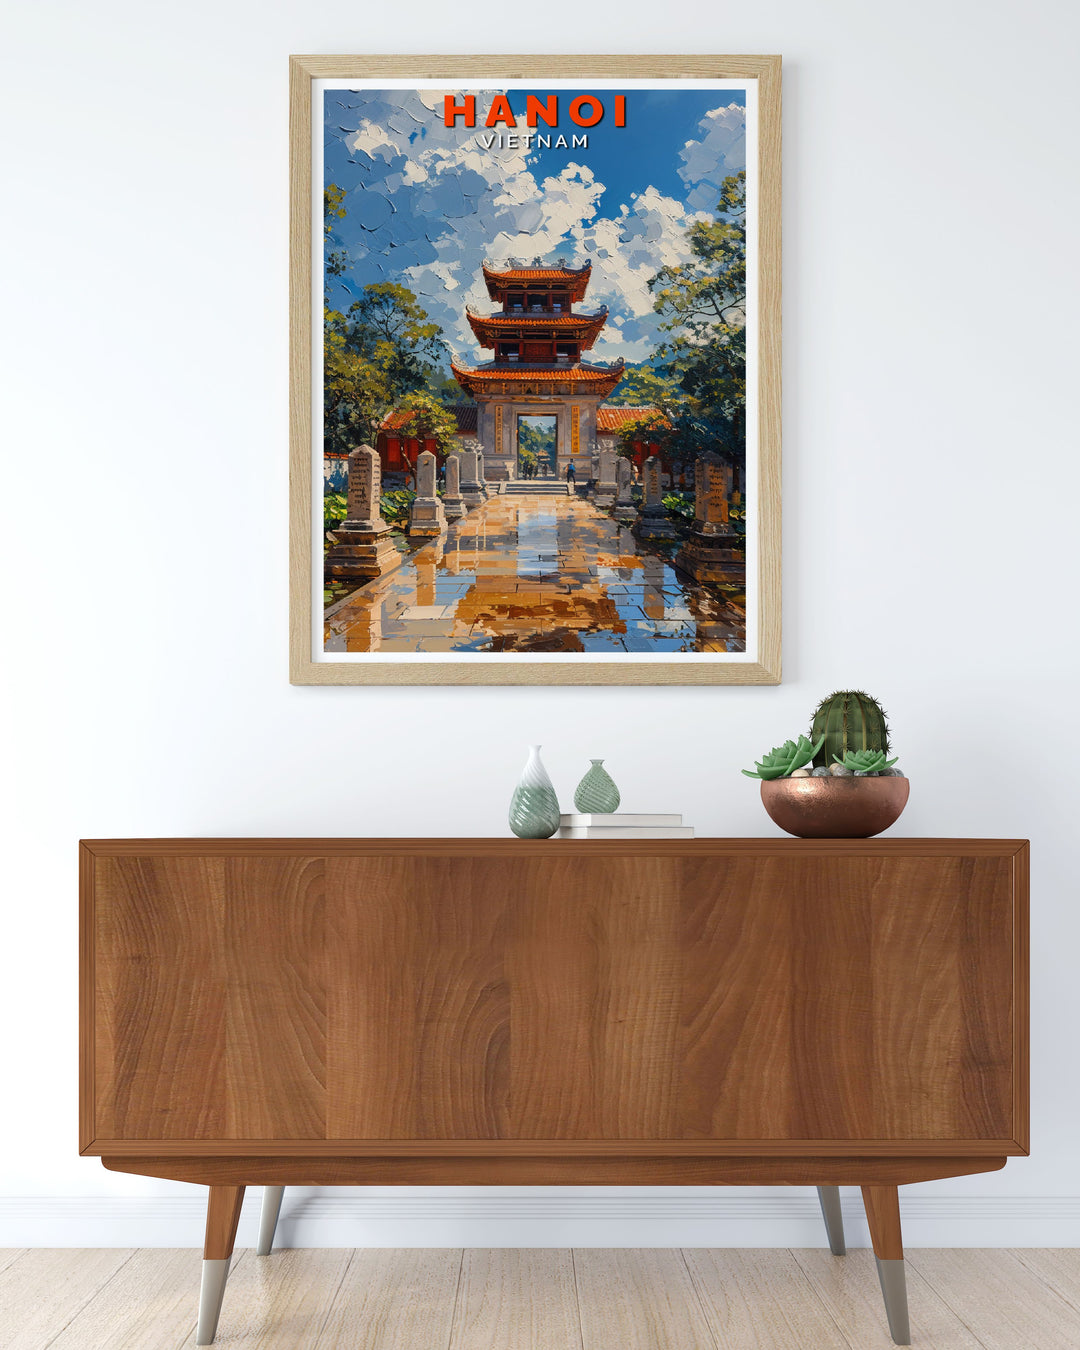 Highlighting the rich cultural heritage and serene surroundings of Hanois Temple of Literature, this travel poster is a beautiful addition to any room.